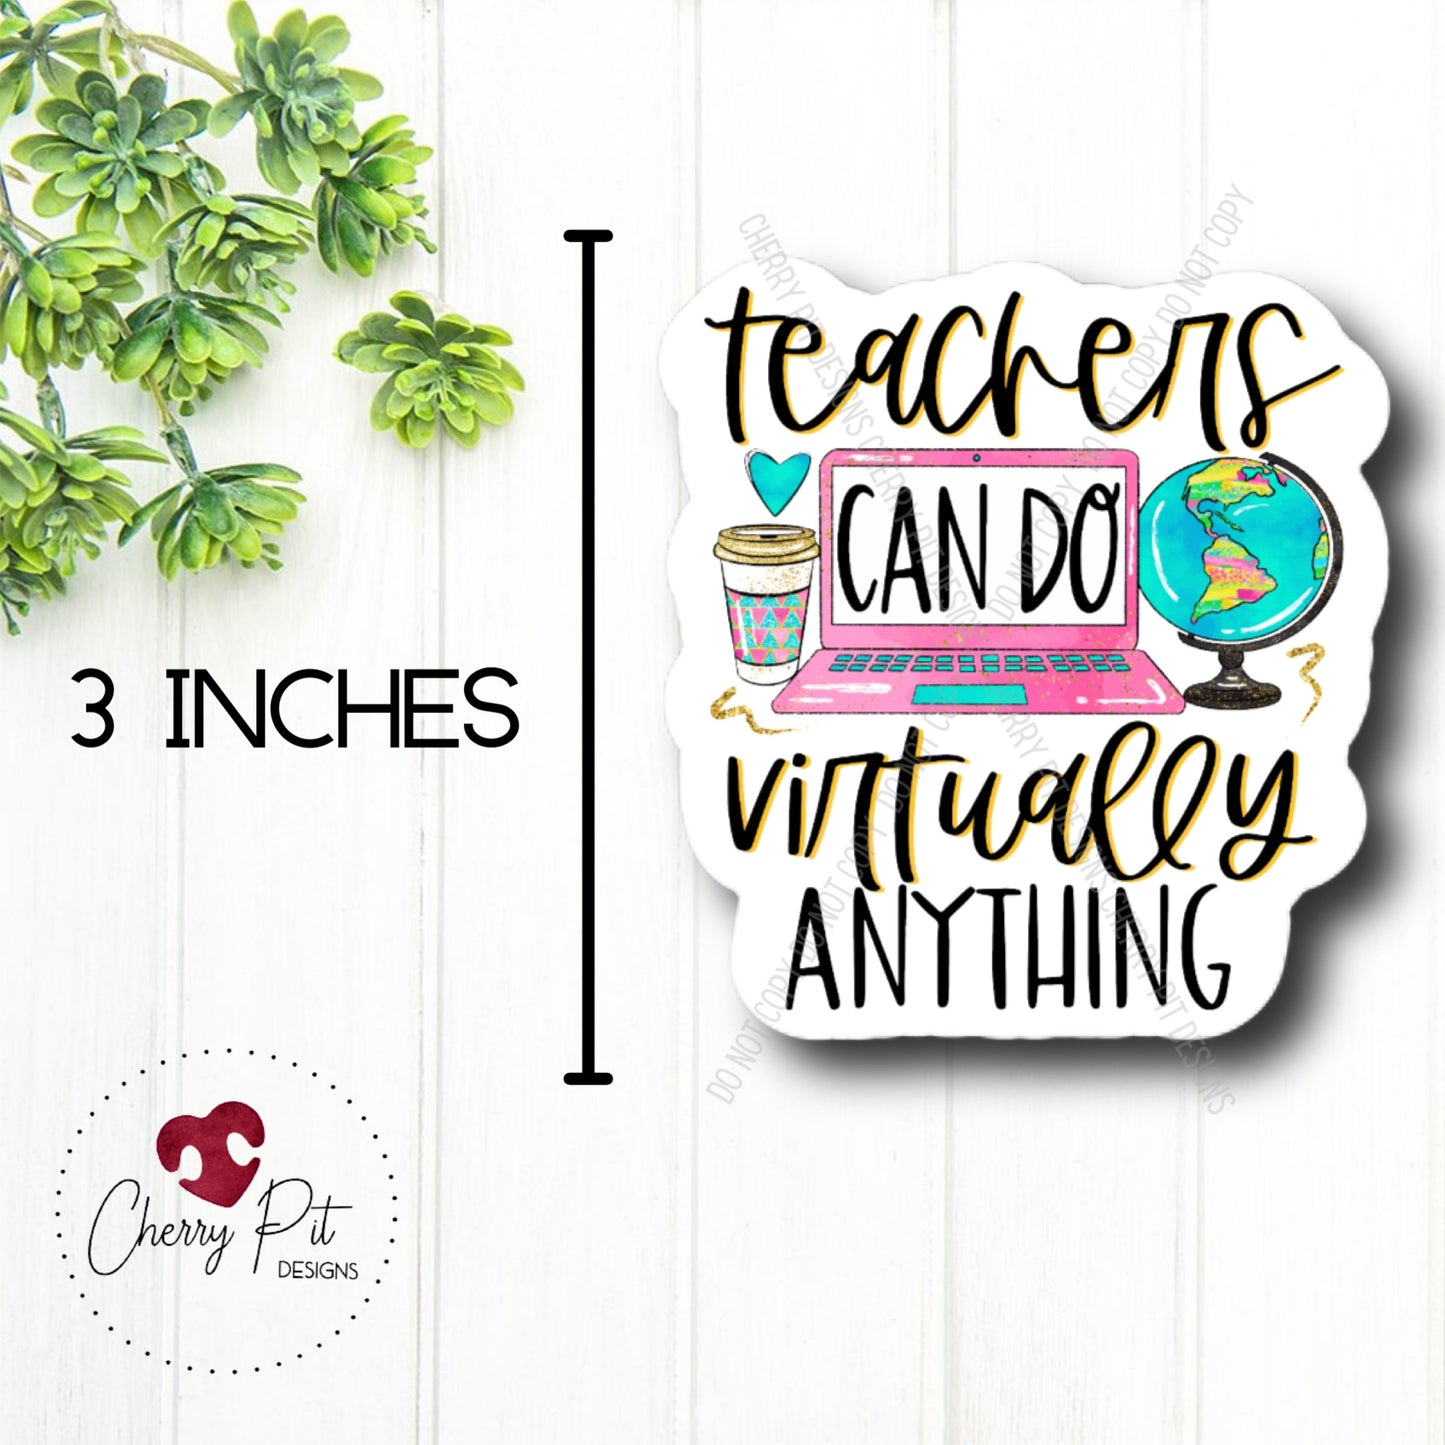 Teachers Can Do Virtually Anything Vinyl Sticker Decal - Cherry Pit Designs